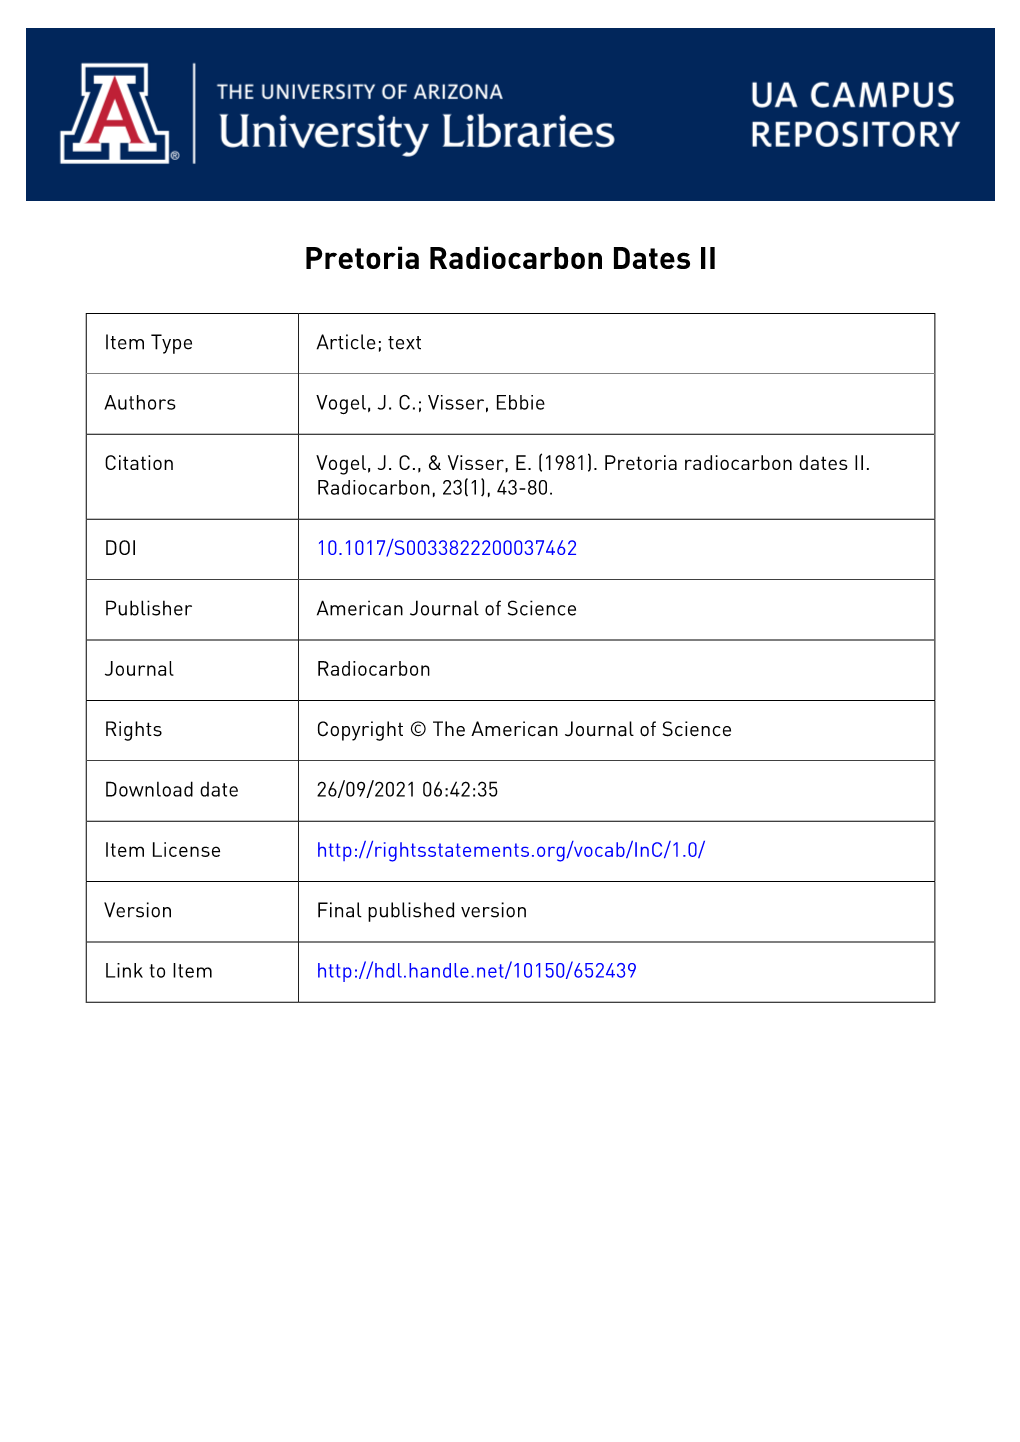 PRETORIA RADIOCARBON DATES II National Physical Research